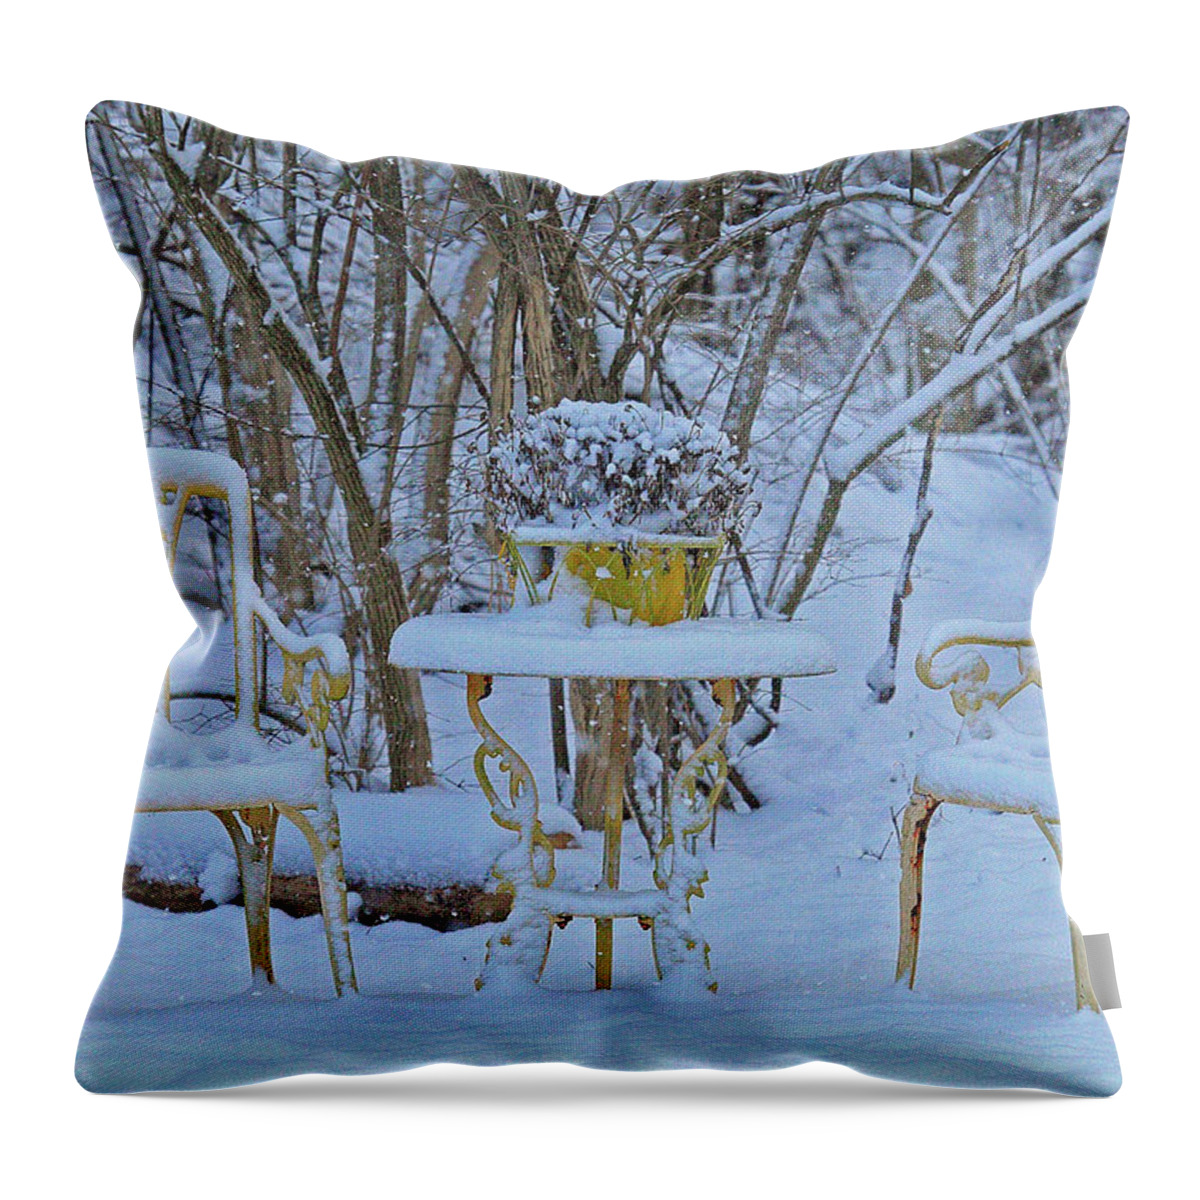 Snowy Sit A Spell Throw Pillow featuring the photograph Snowy Sit a Spell by PJQandFriends Photography